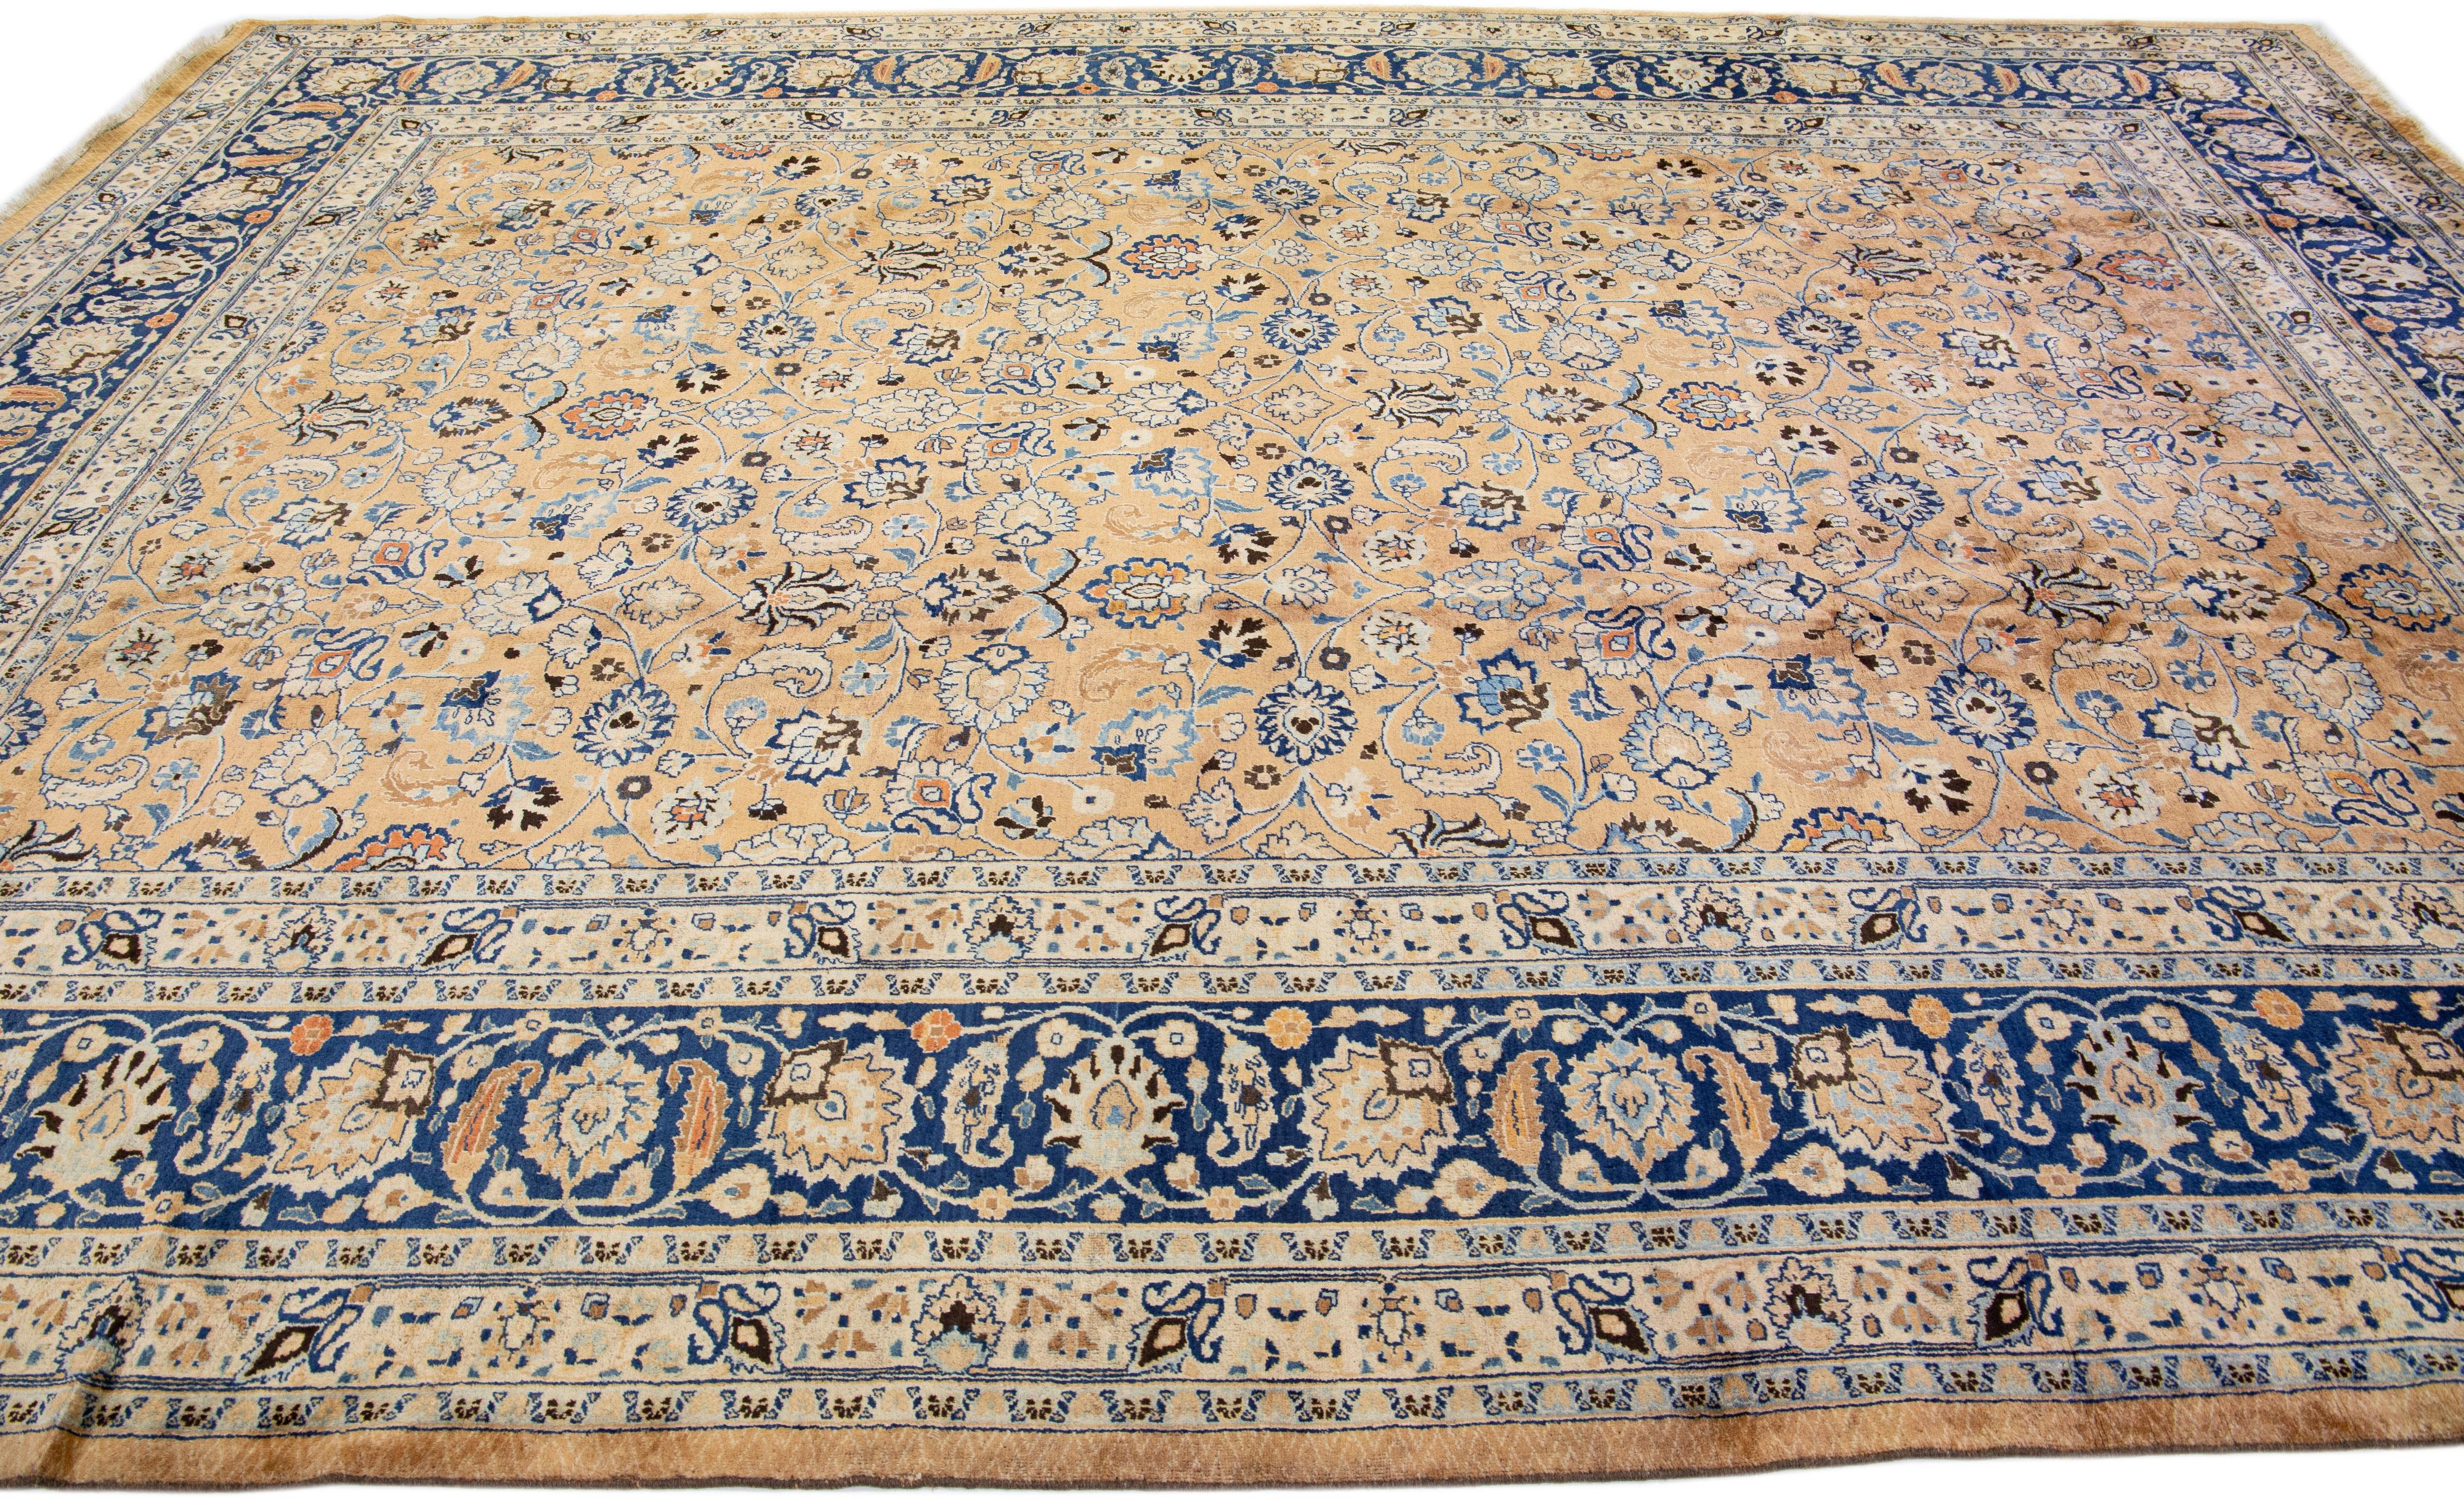 Antique Persian Mashad Handmade Tan Wool Rug with Allover Motif In Good Condition For Sale In Norwalk, CT